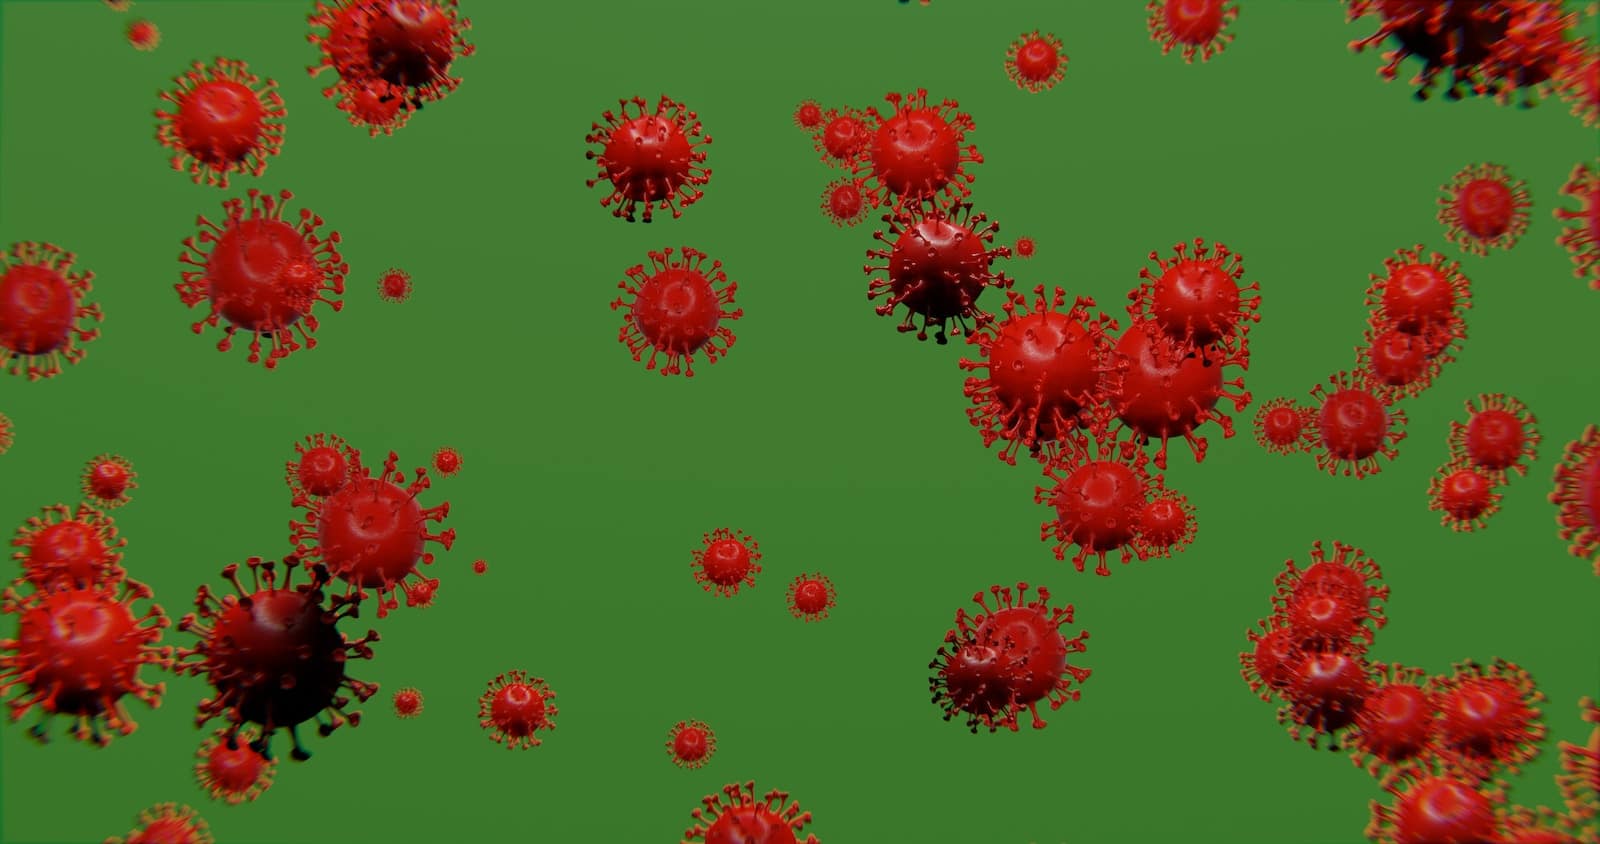 a group of red balls of blood on a green background